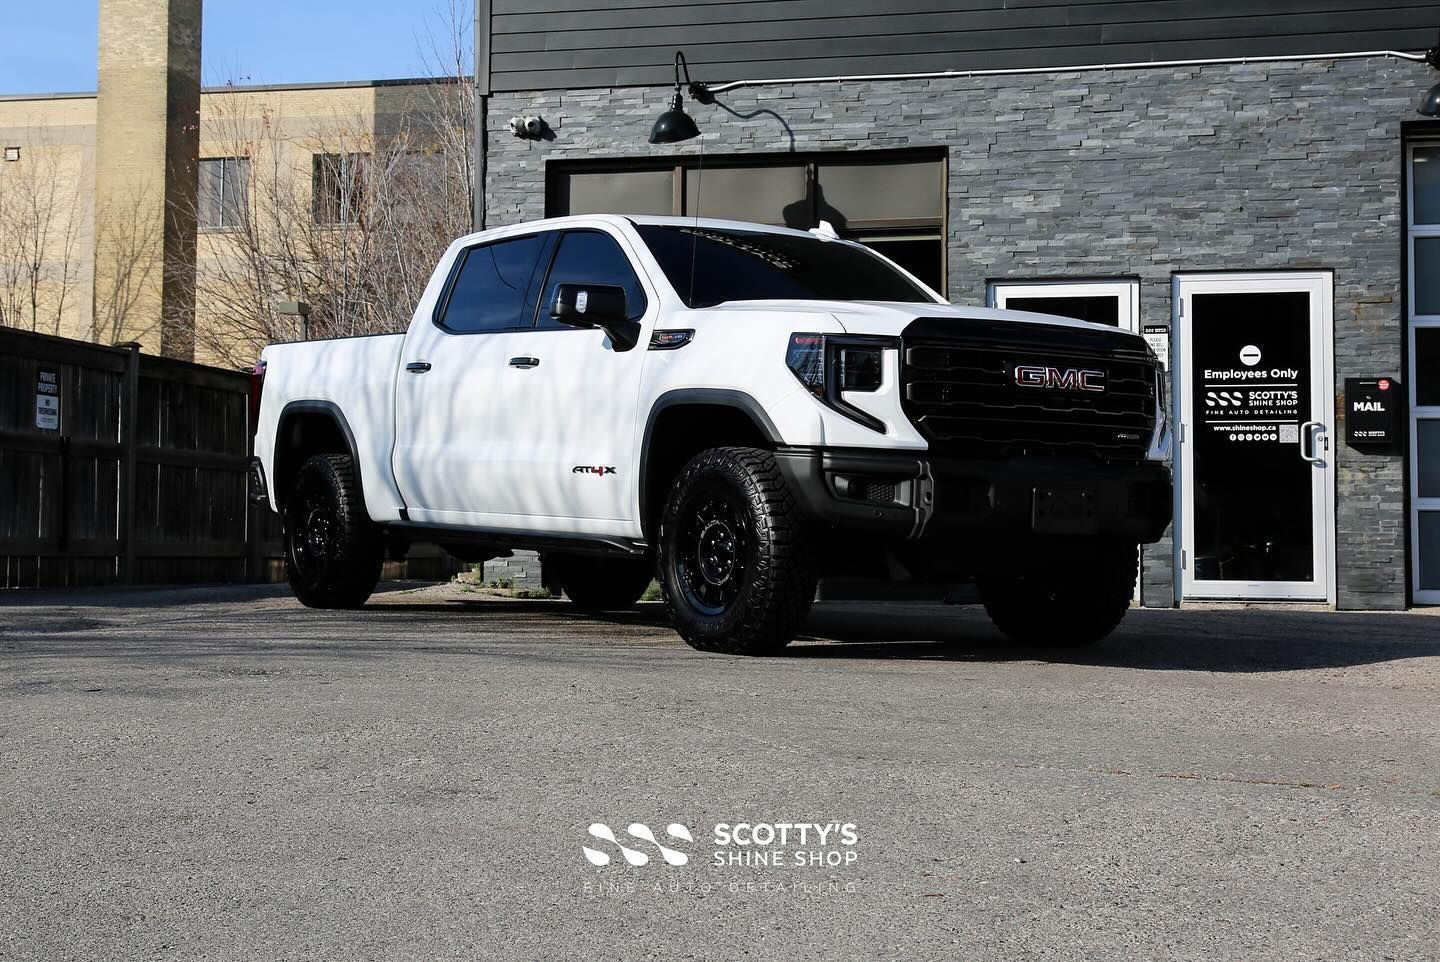 2024 GMC Sierra AT4X AEV Xpel Paint Protection Film, Ceramic Window Tint and Ceramic Coatings applied to Paint, Glass and Wheels London, Ontario Canada